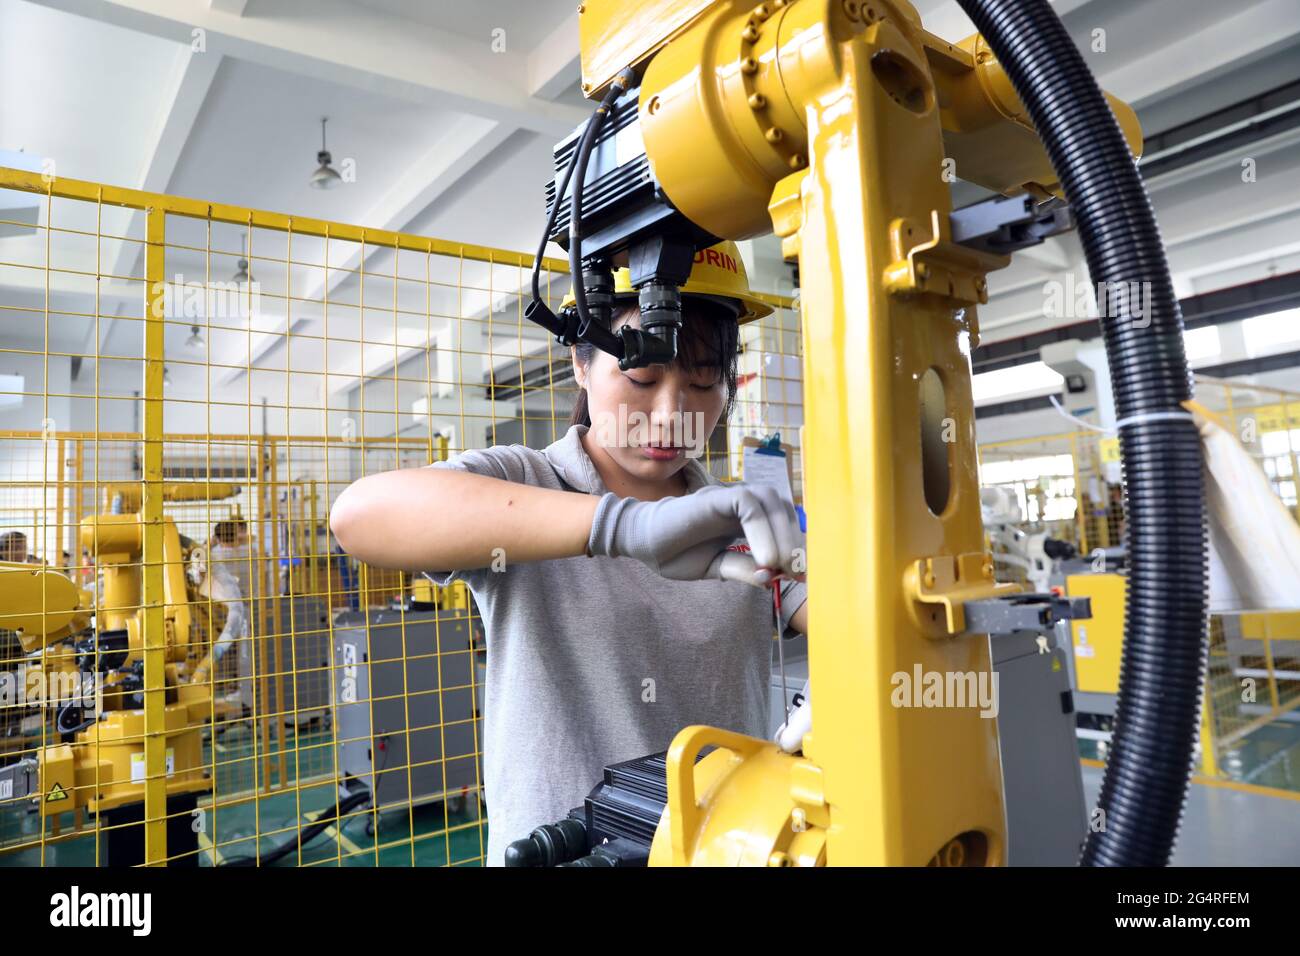 June 23, 2021, Haian, Haian, China: On June 22, 2021, the staff of Jiangsu  Turing Intelligent Robot Co., Ltd. installed and debugged welding robots in  the workshop. Turing Intelligent Robot, located in